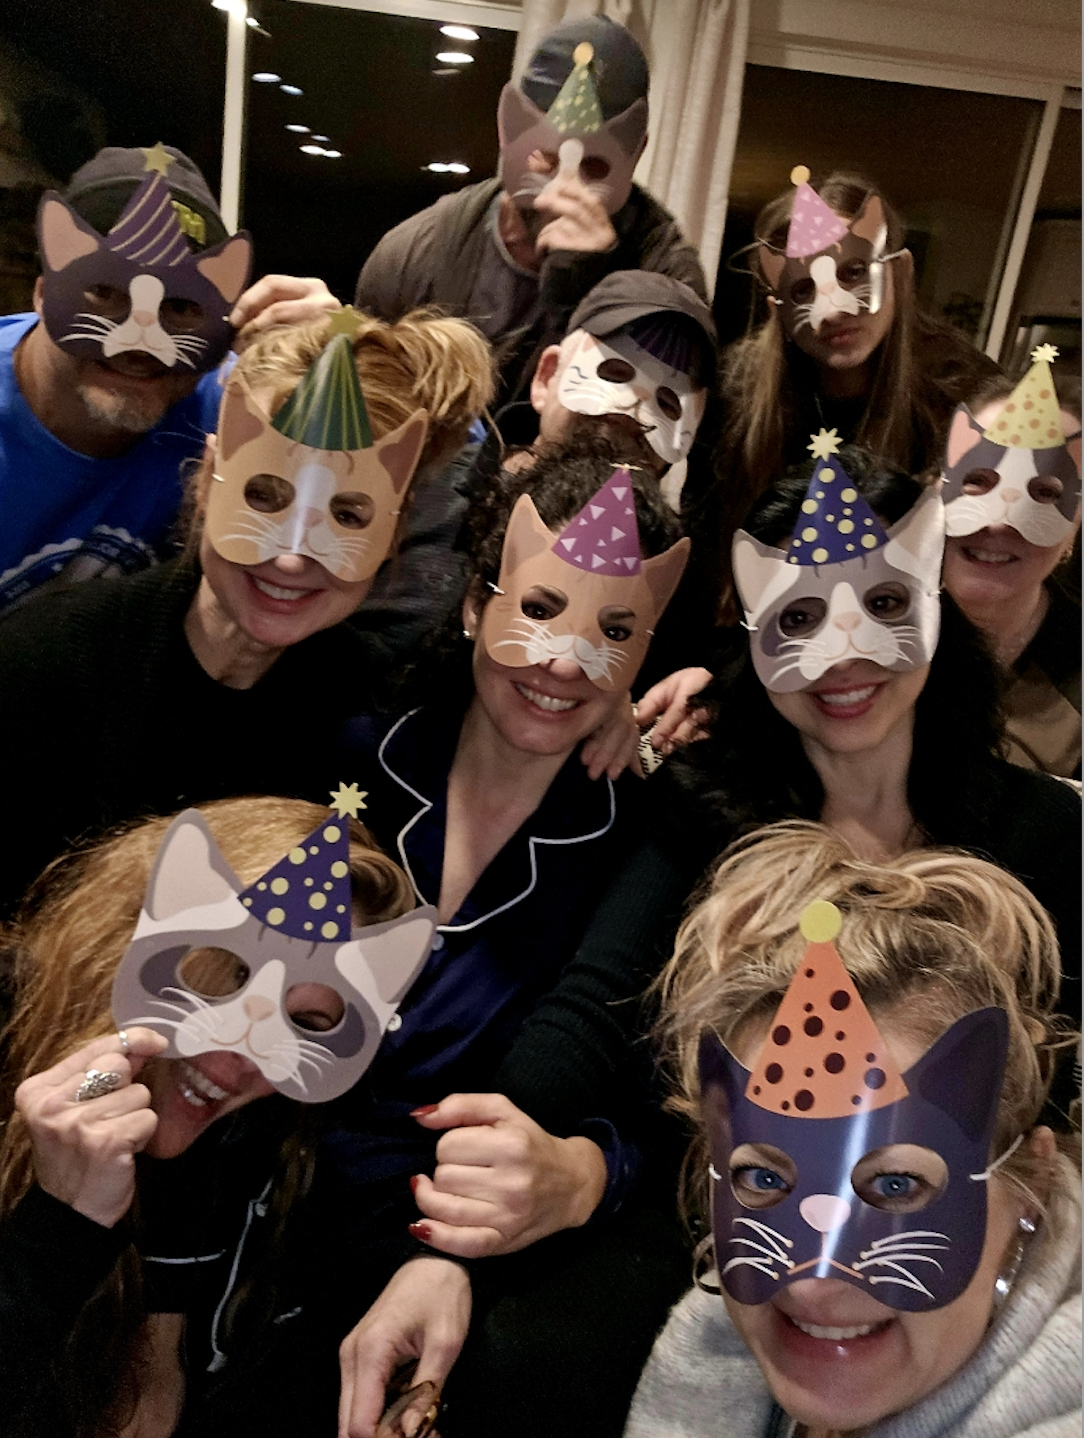 A group of 10 people cram into the frame of a selfie. They're all wearing cat-themed party masks, so we can't see their faces. Some are women and some are men. 